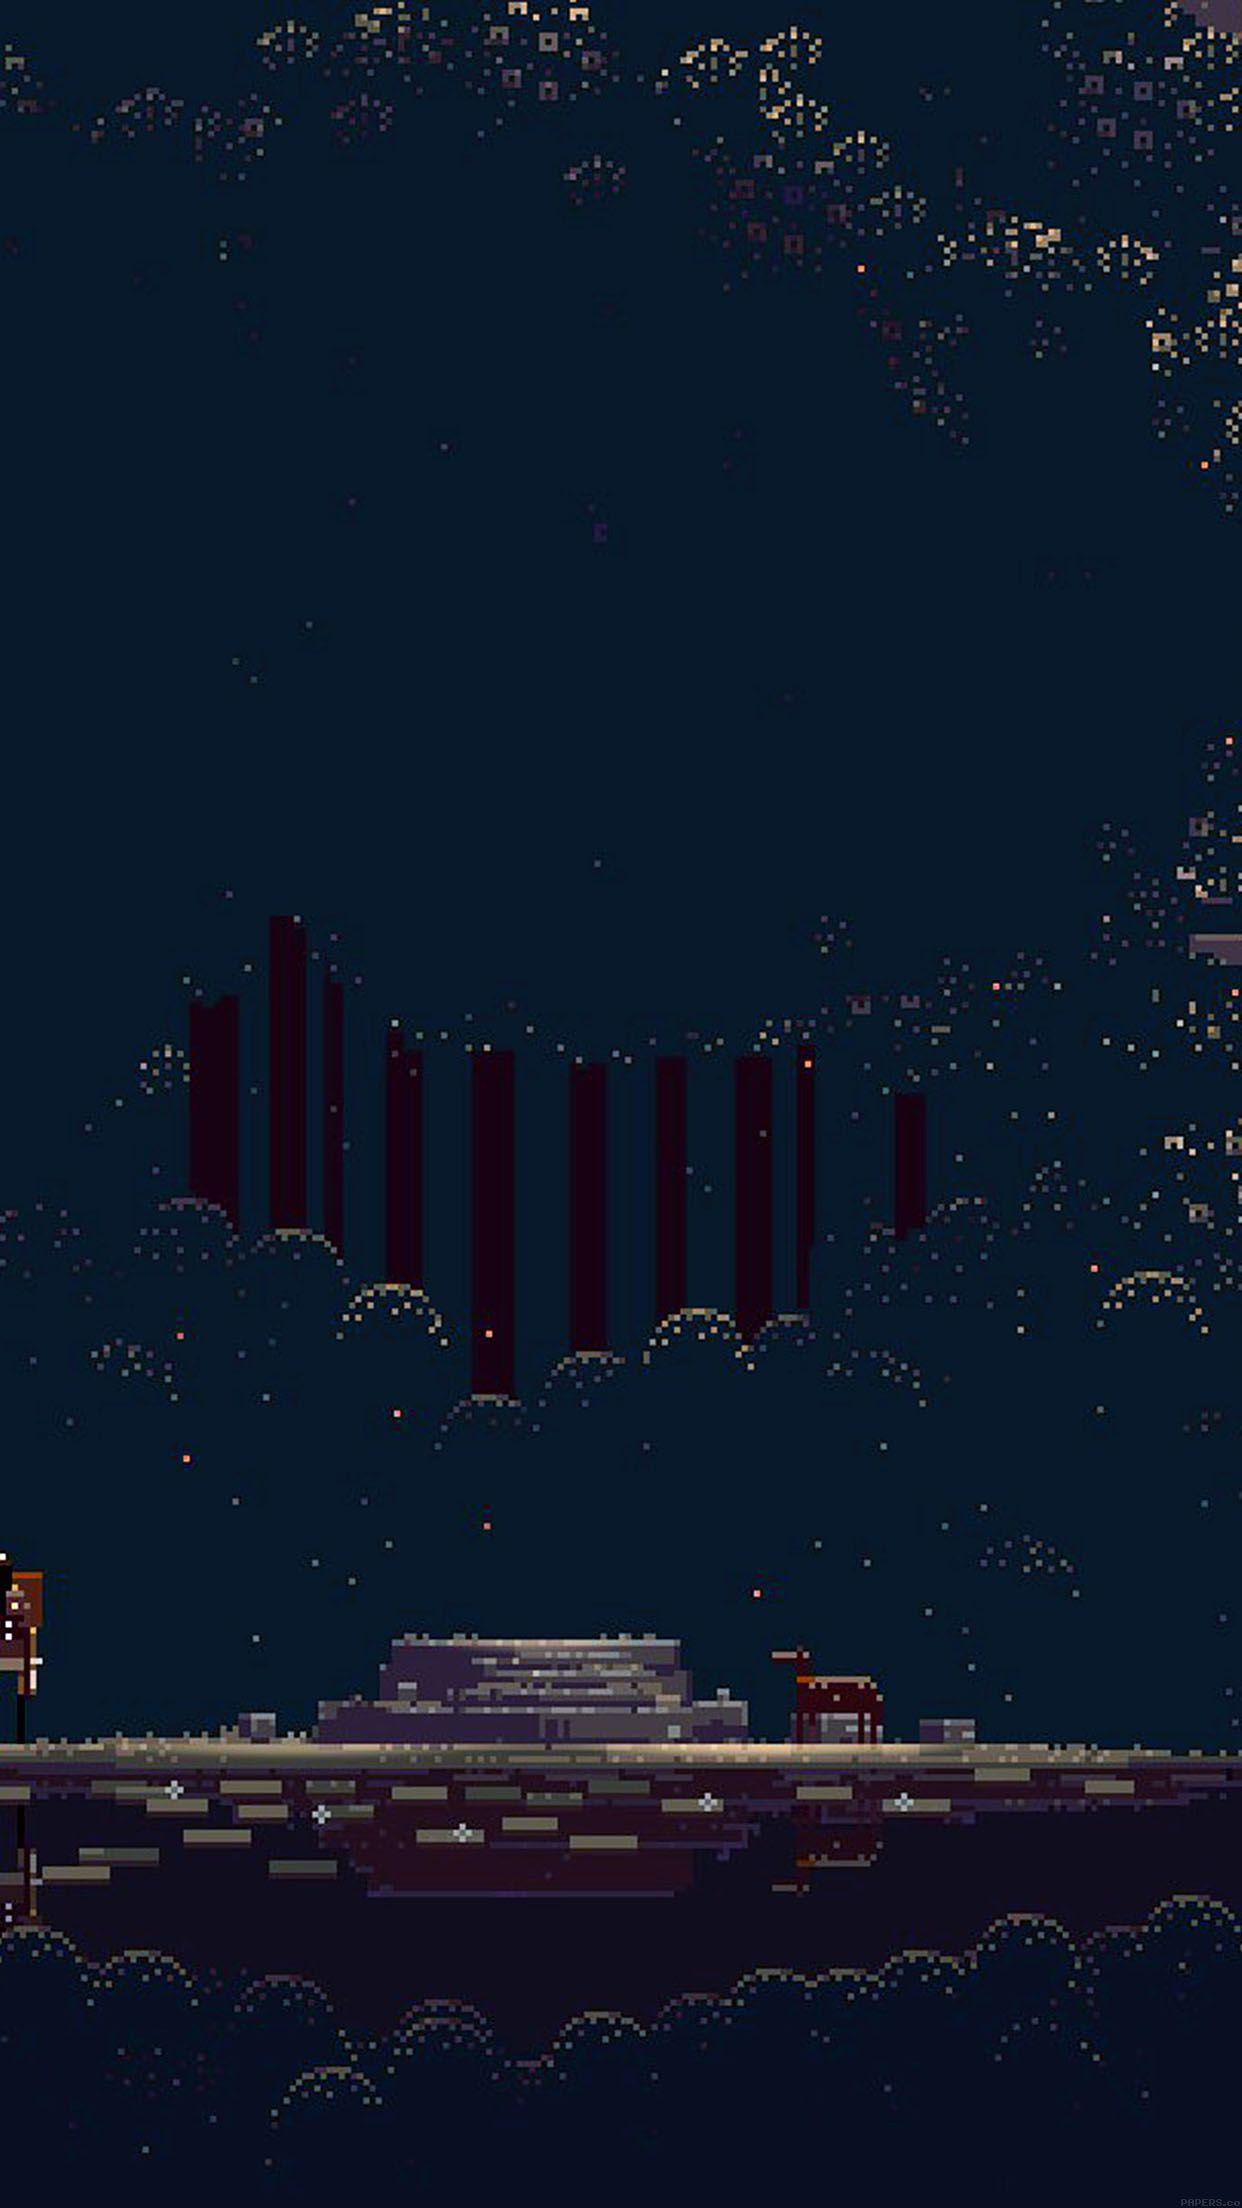 8 Bit Video Game Wallpaper For IPhone And IPad